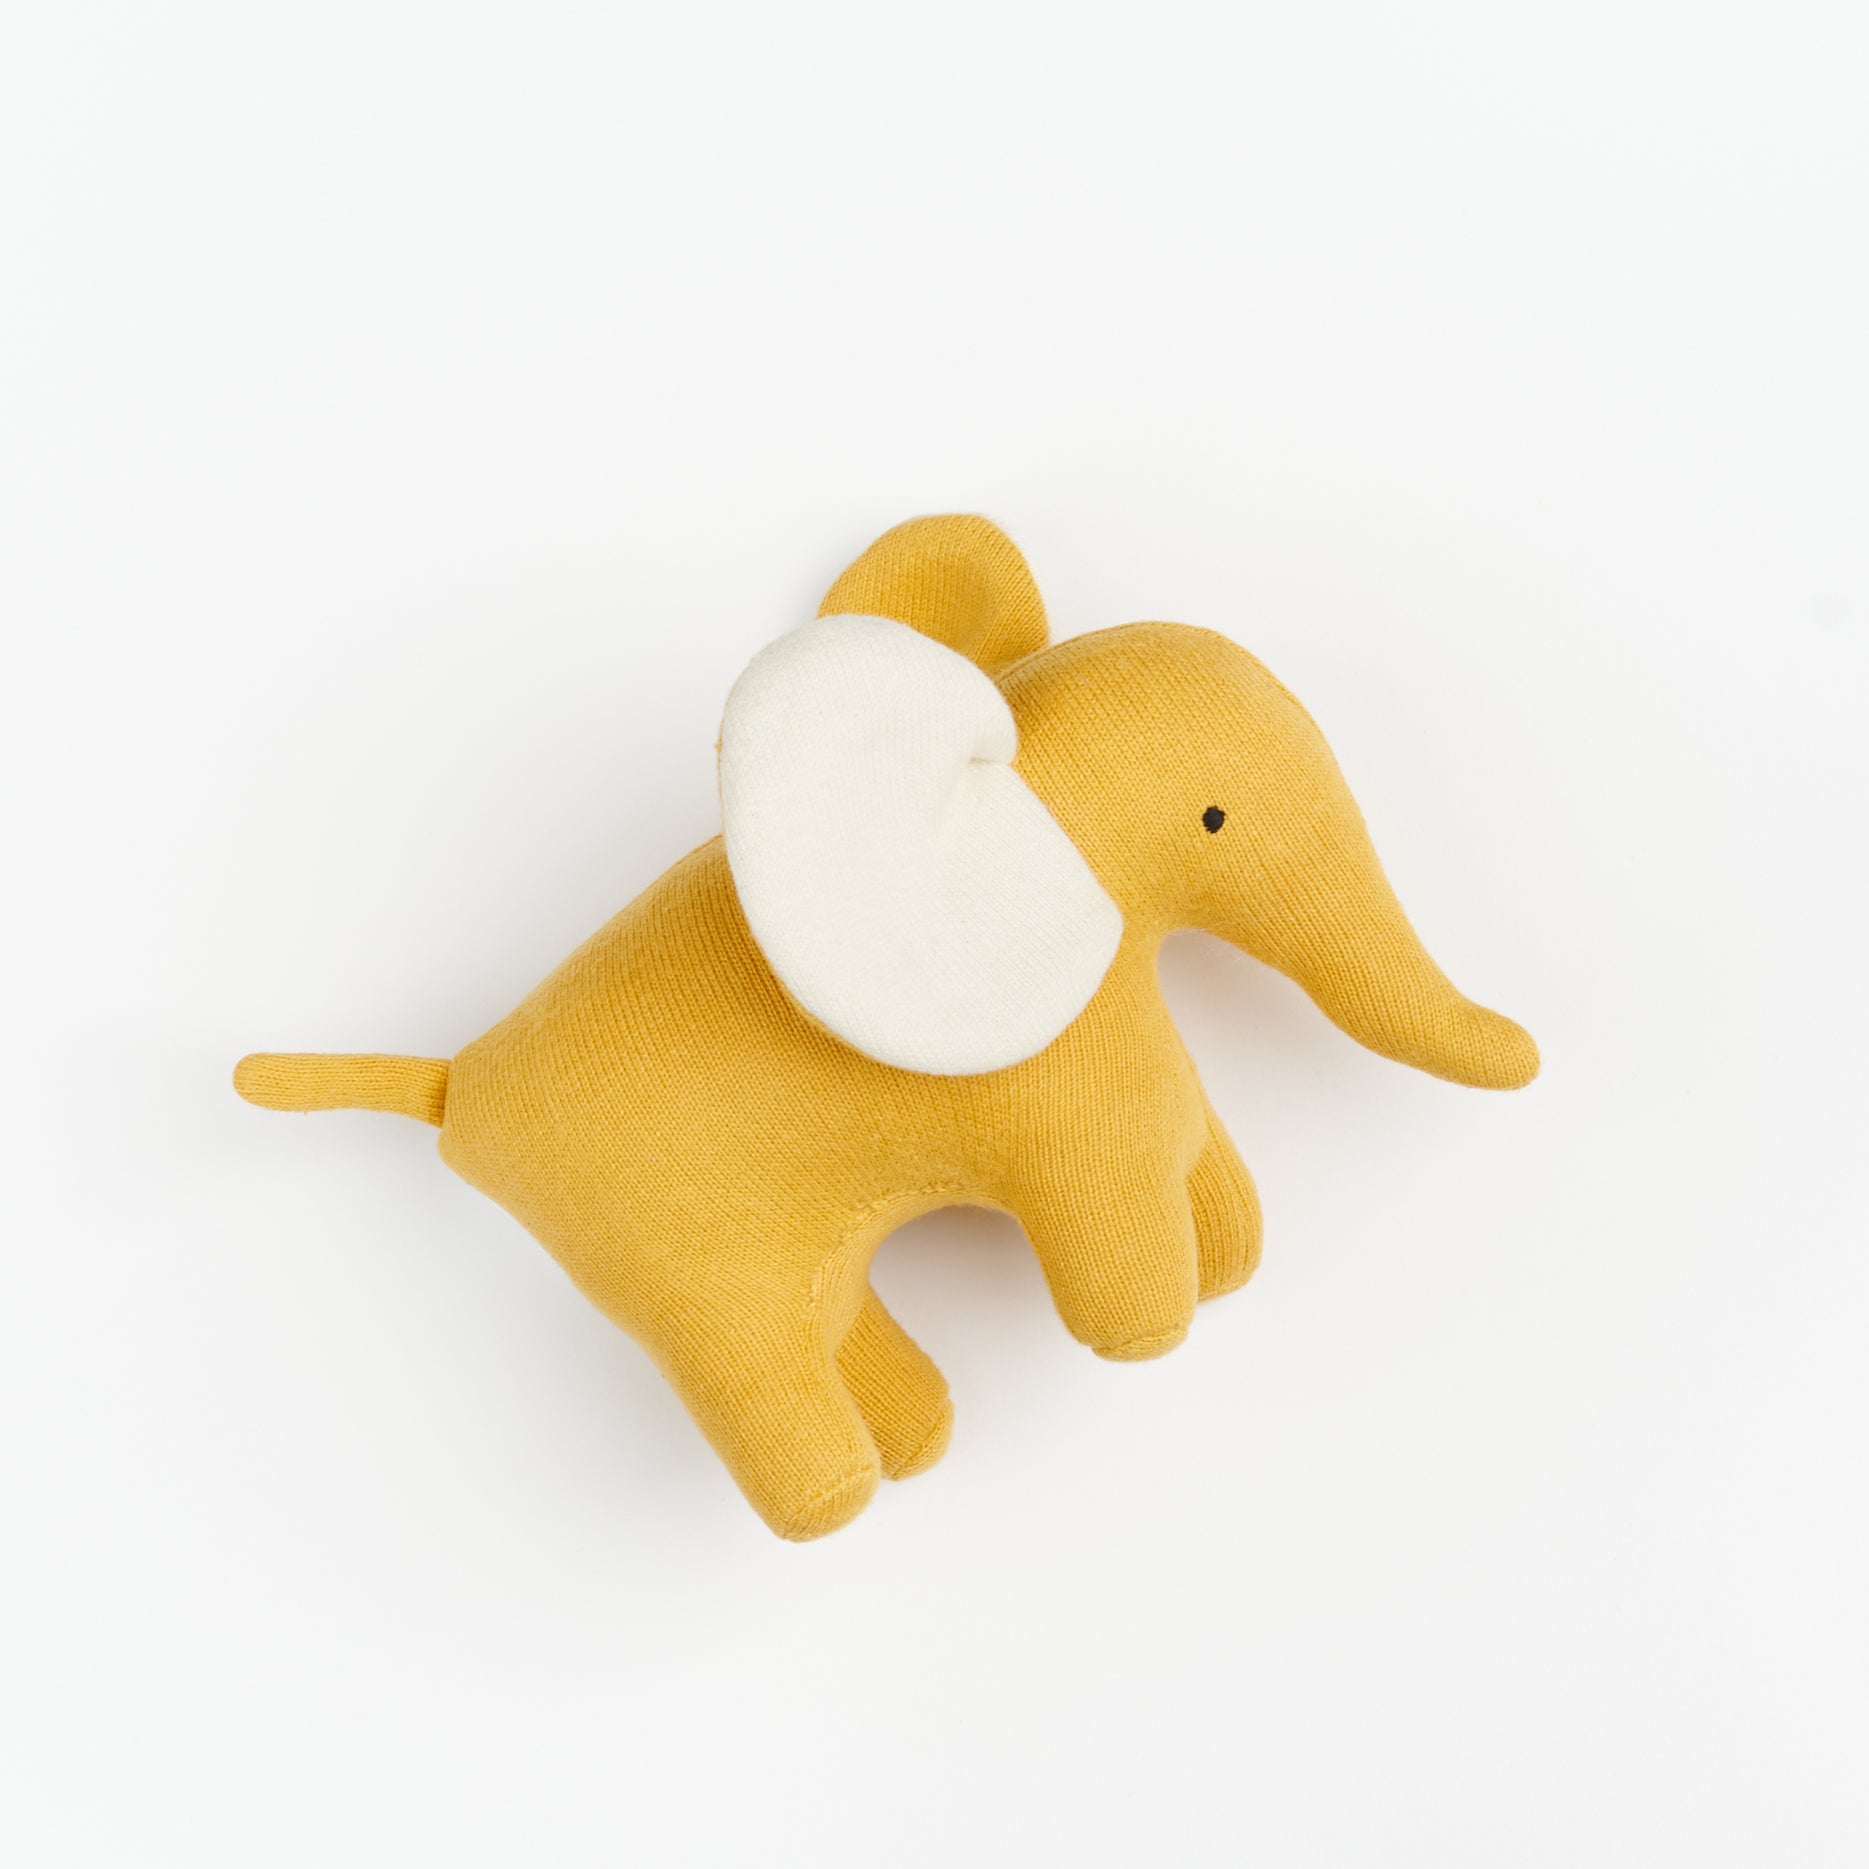 A small plush soft toy elephant with yellow body, tail and trunk and white insides of cute floppy ears